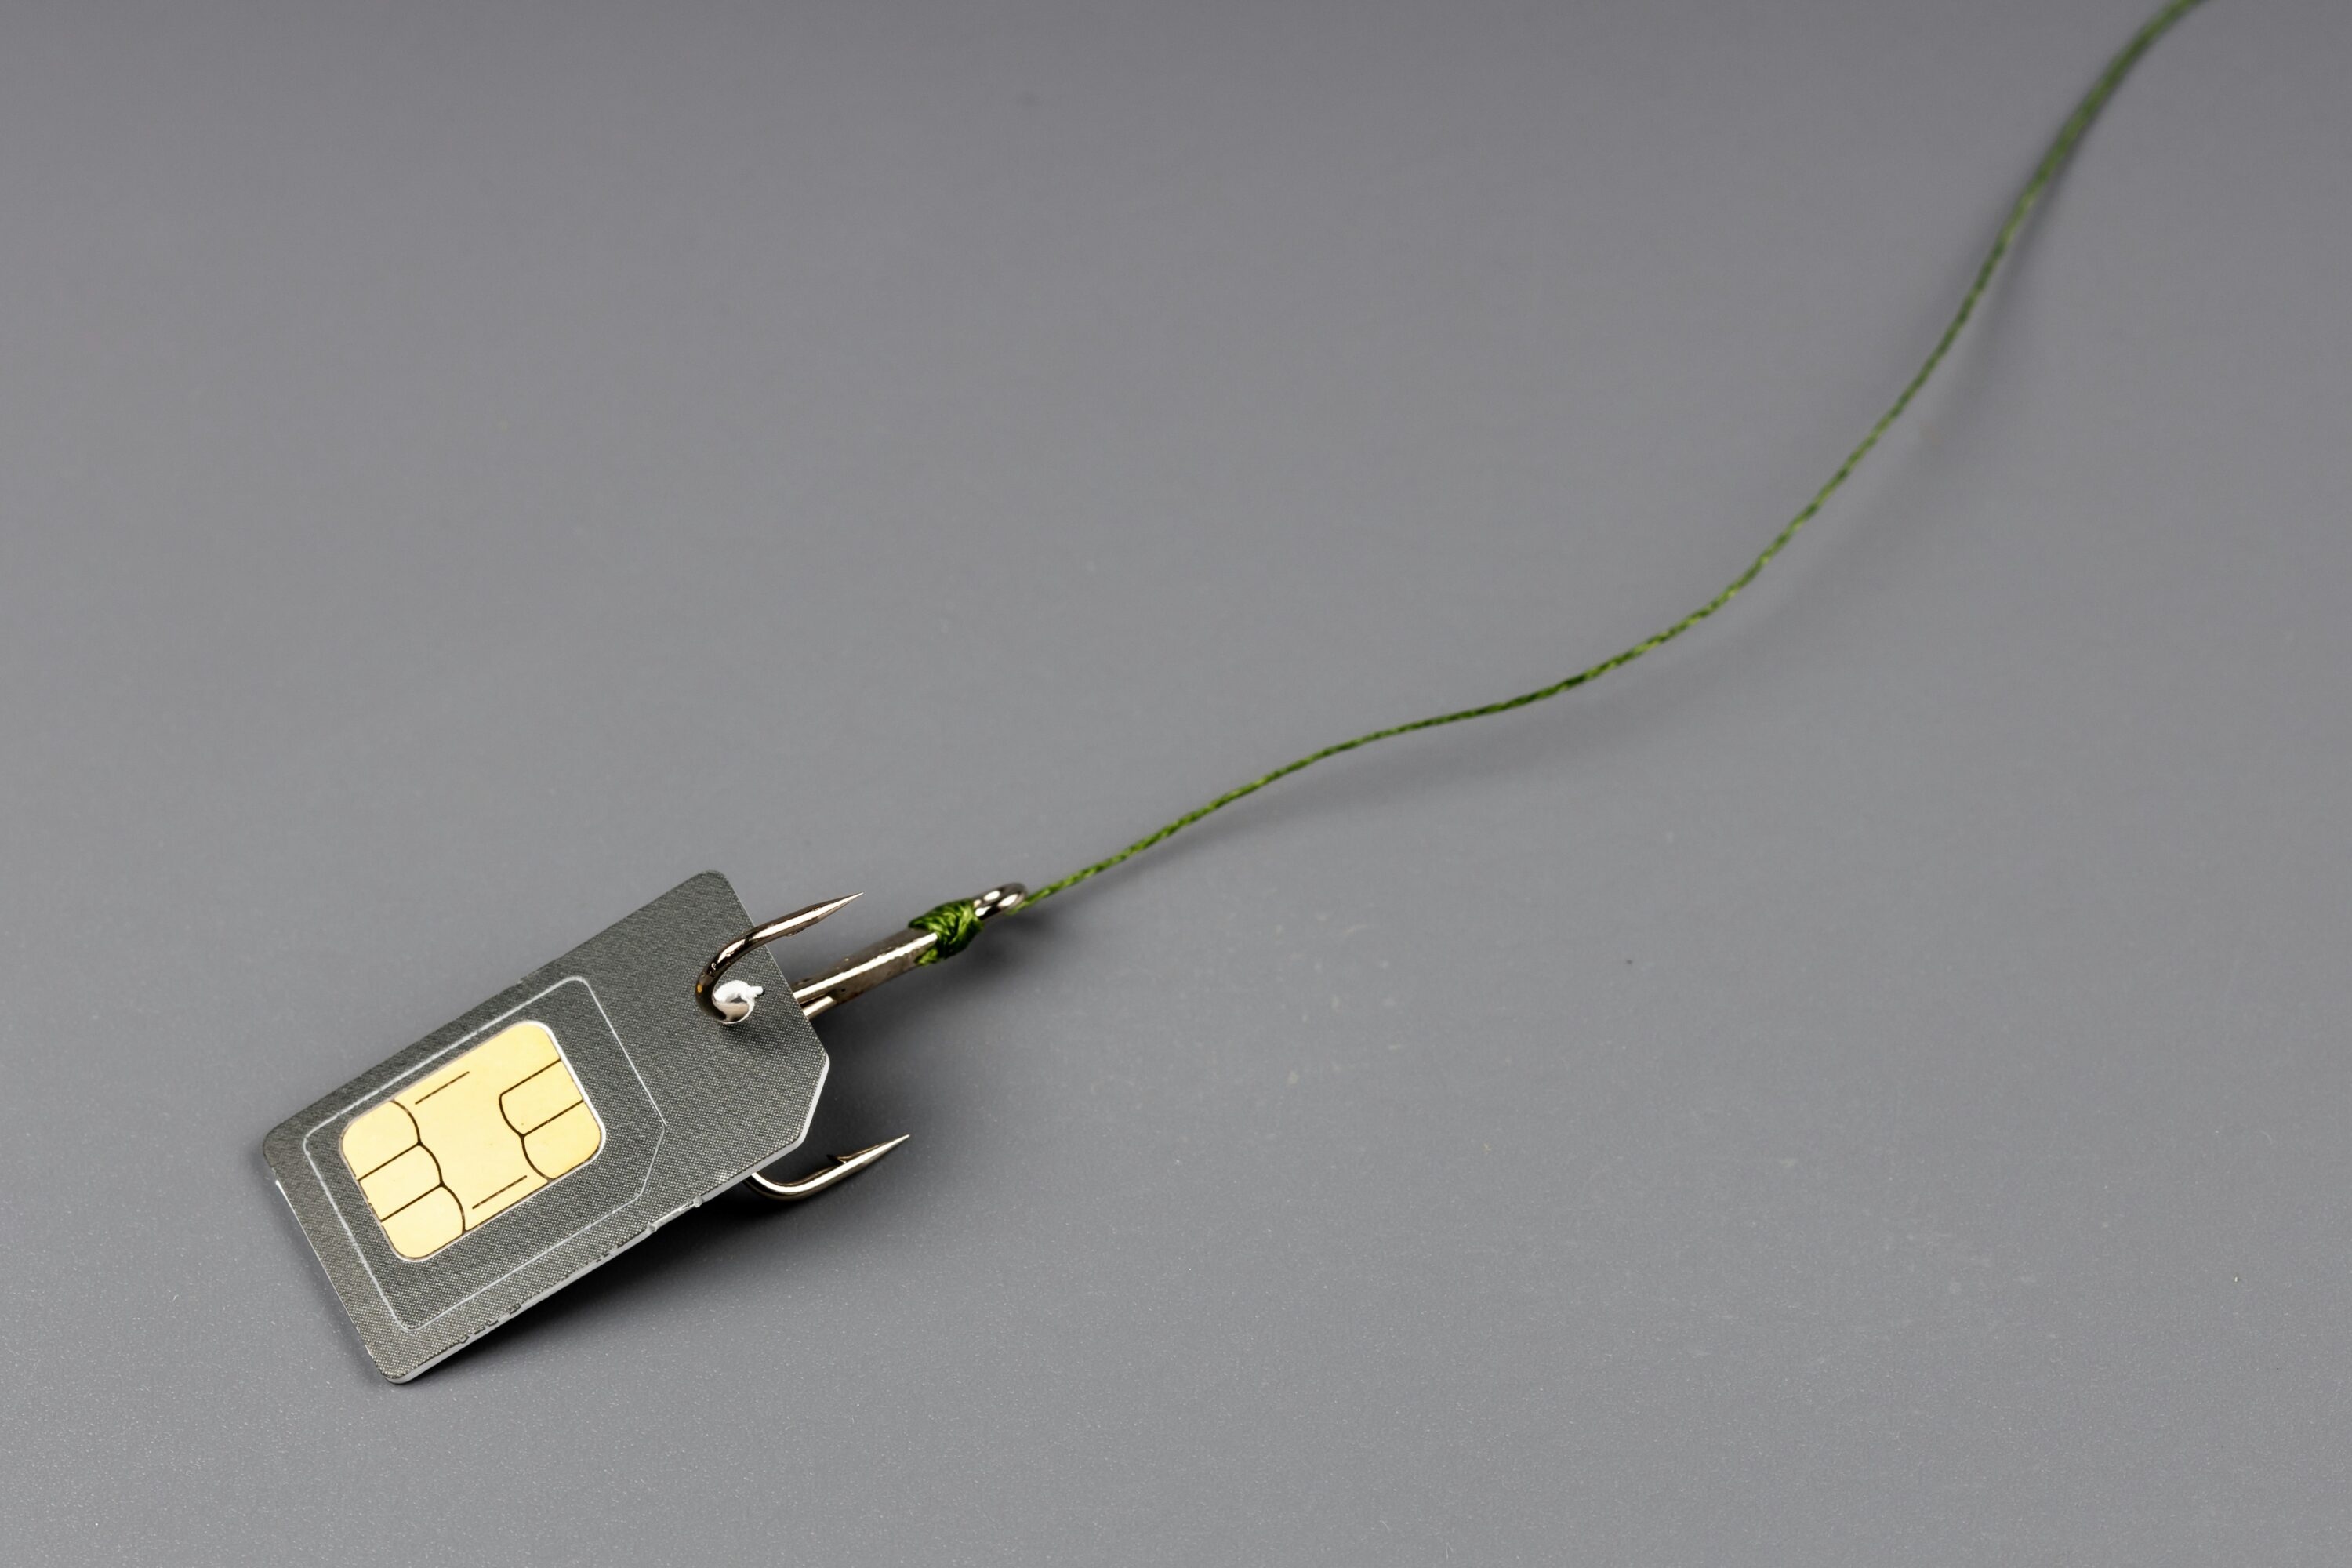 FTX’s $400M hack uncovered as SIM-swap scheme, three indicted